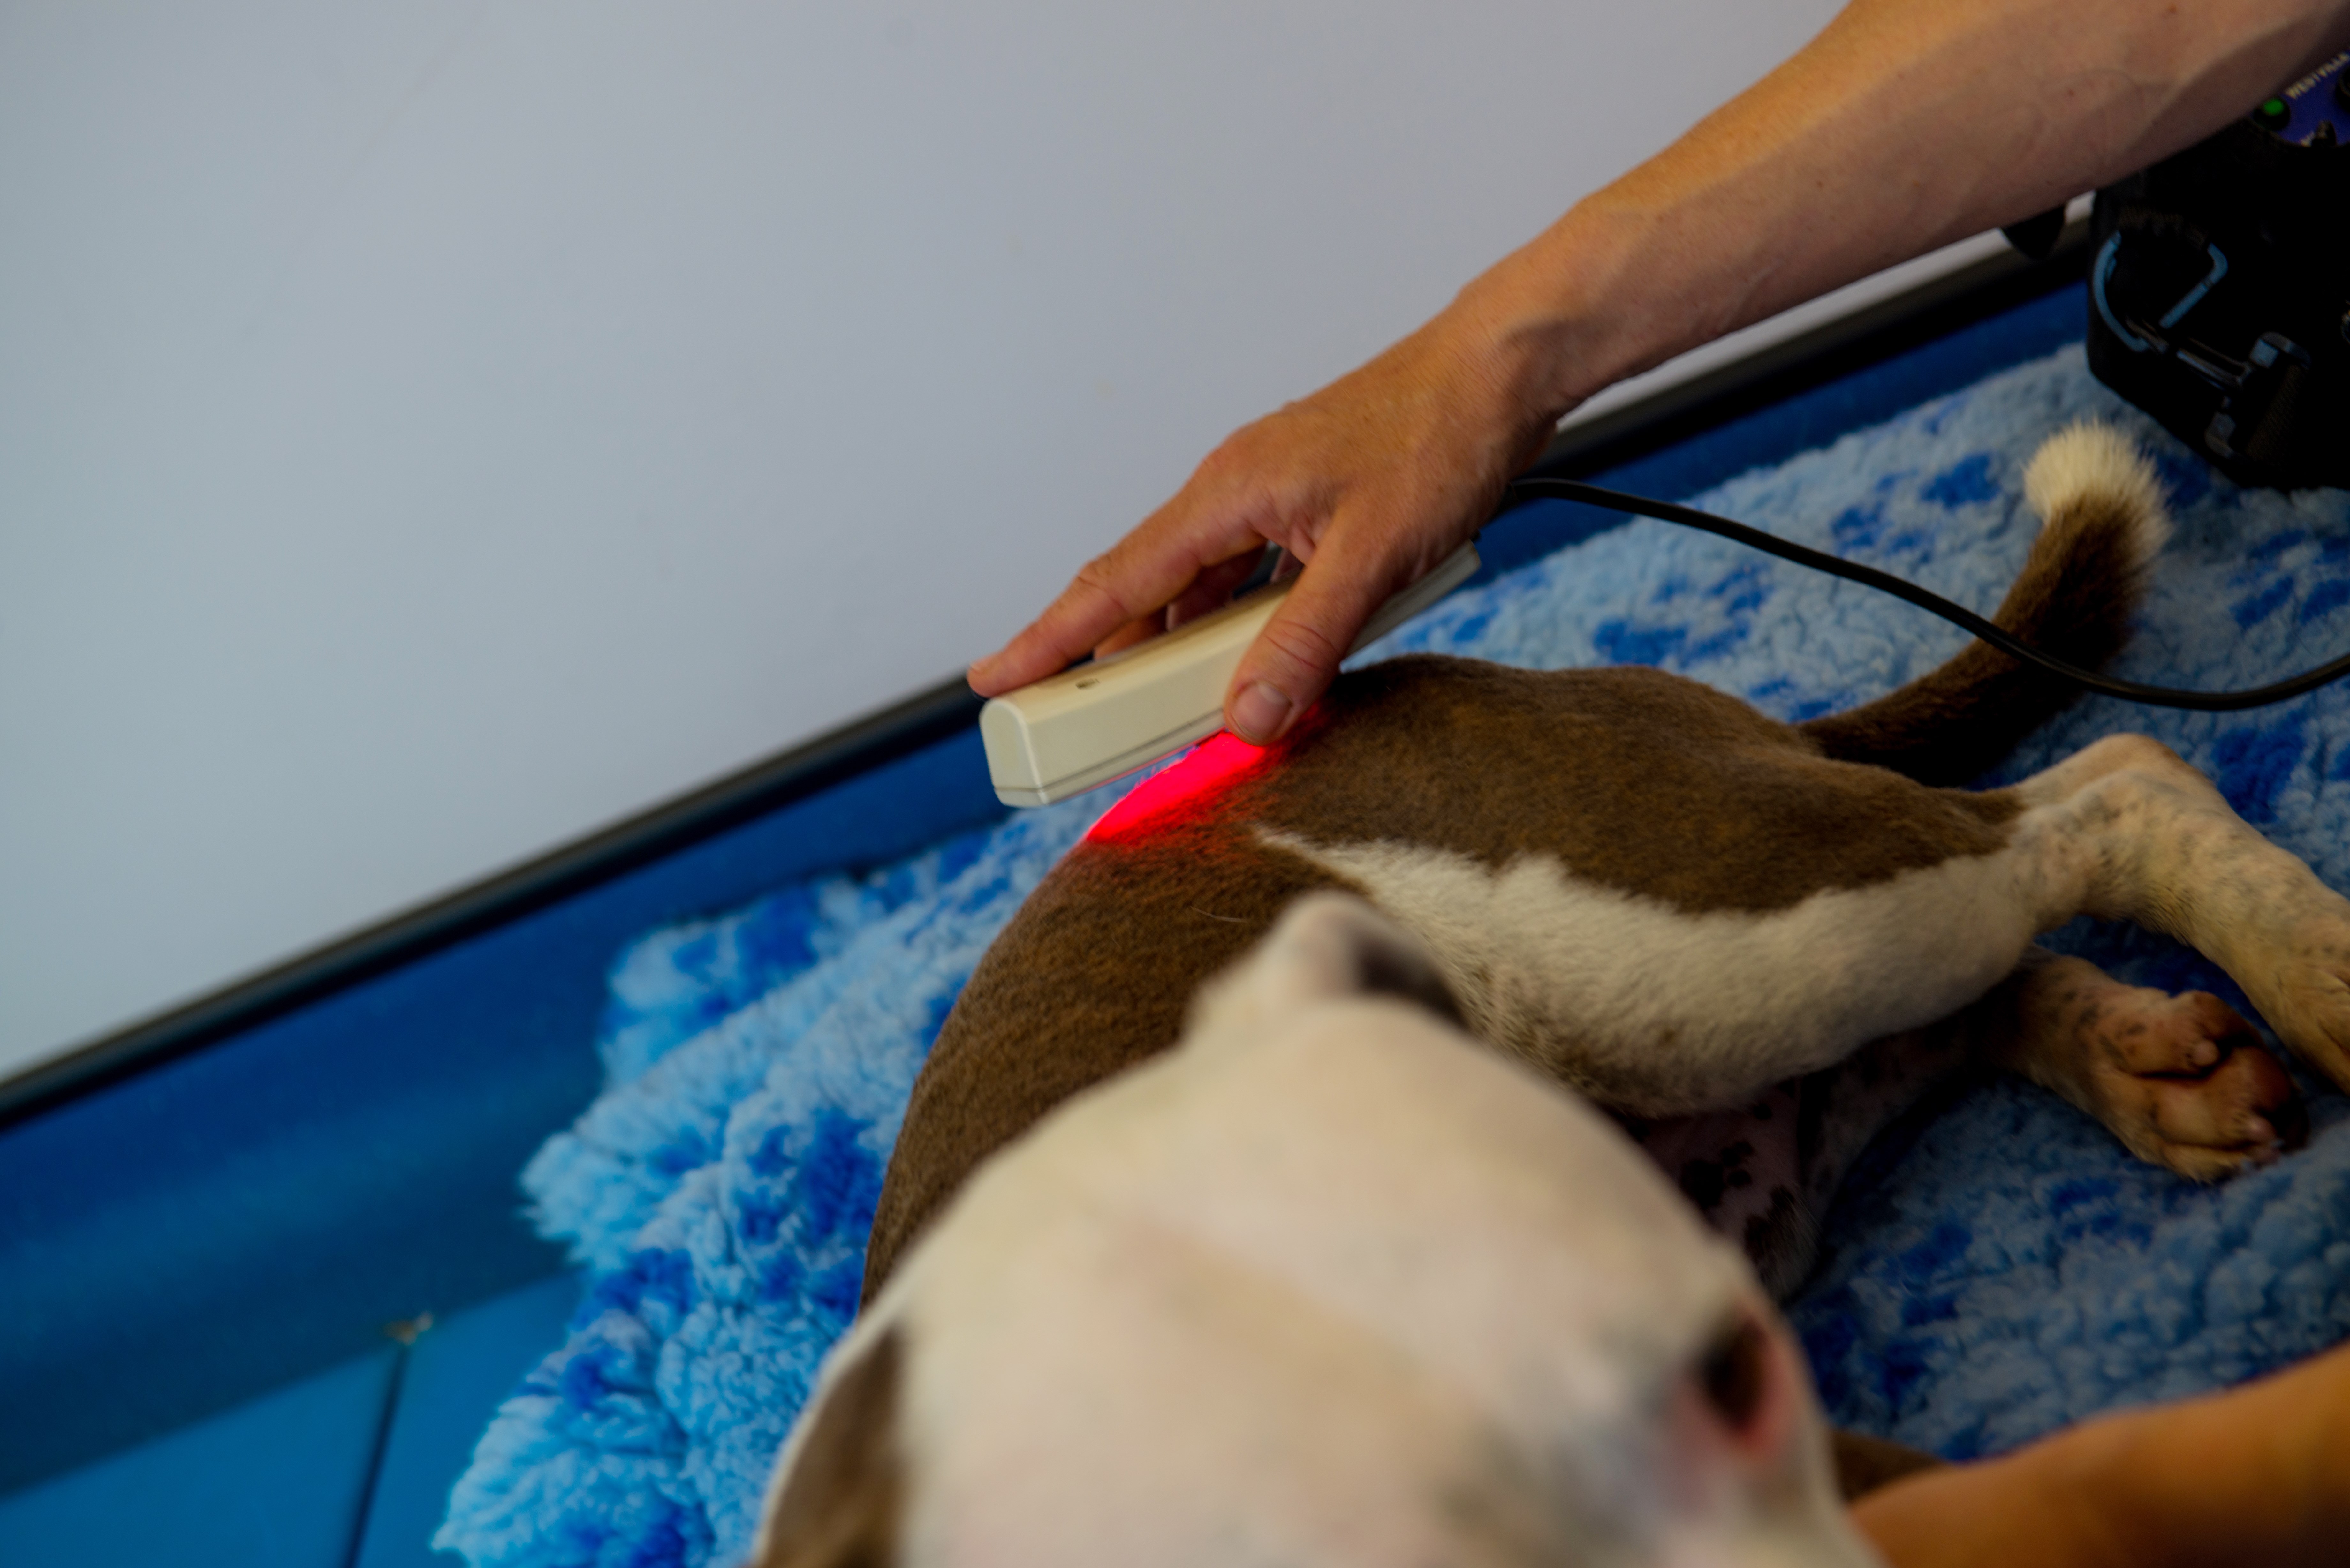 Laser therapy